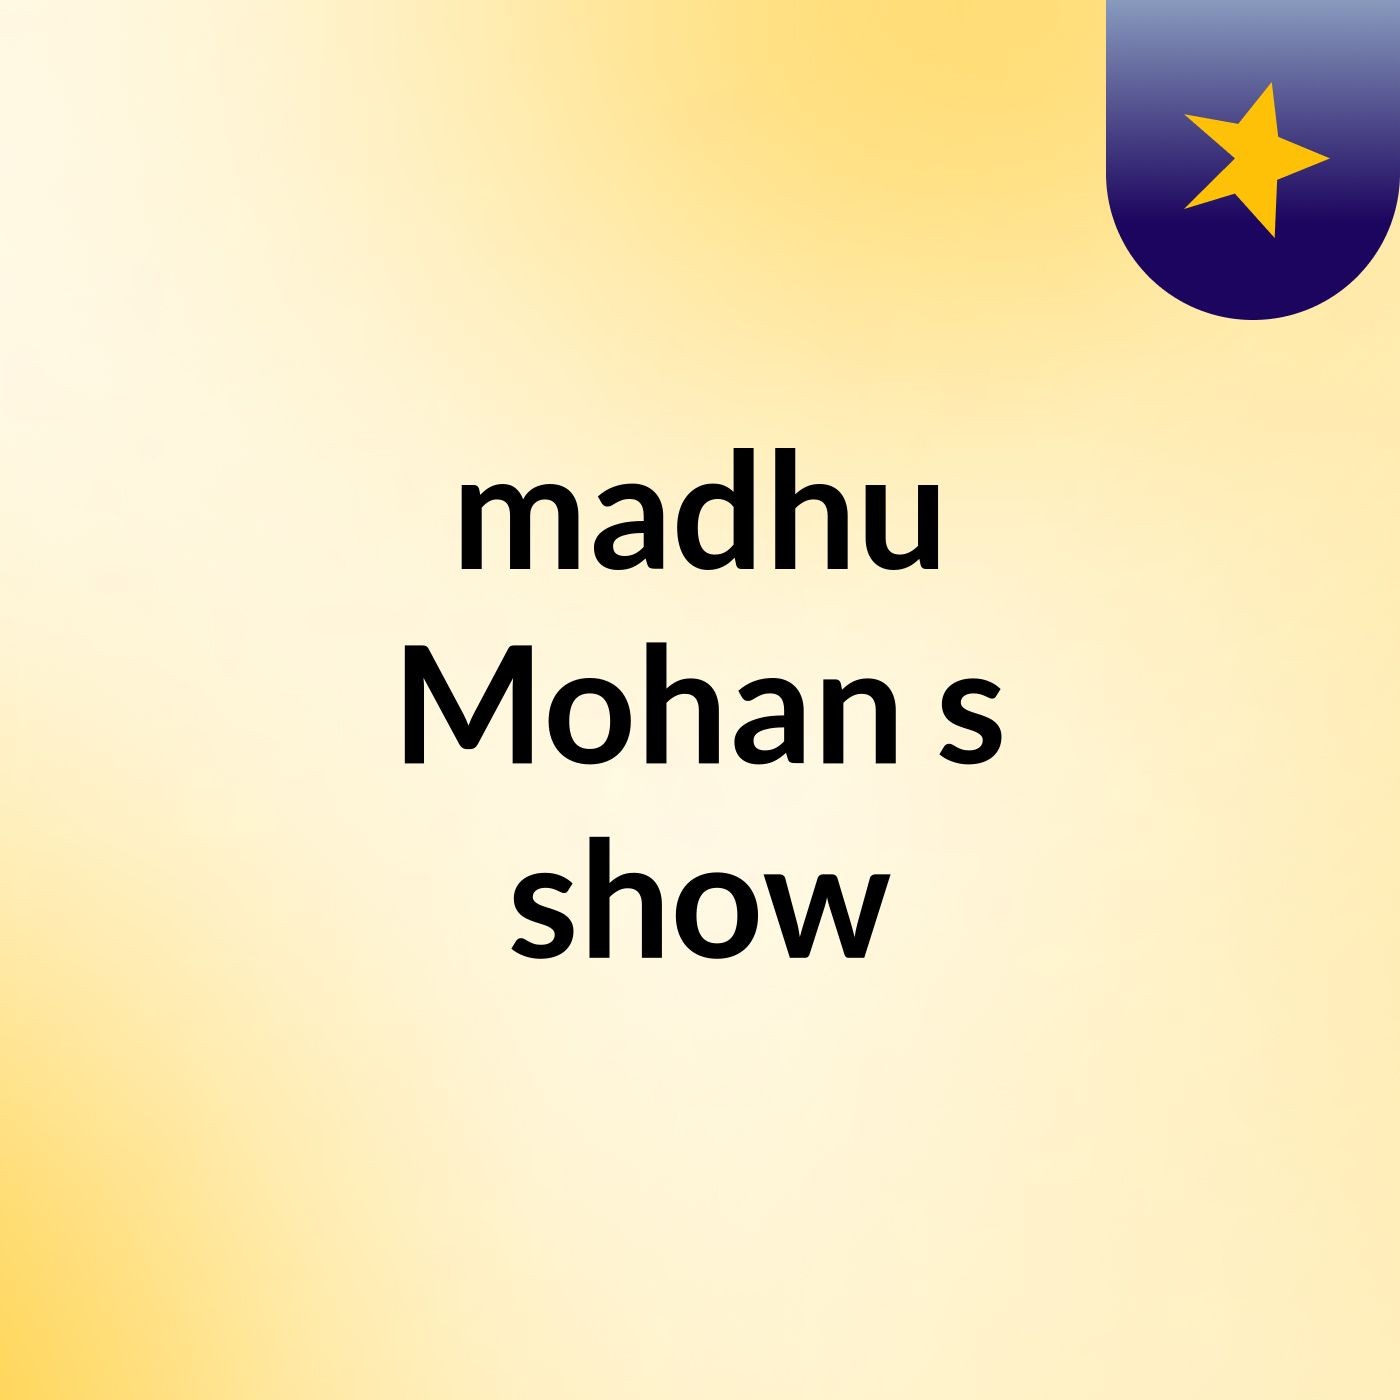 Episode 14 - madhu Mohan's show